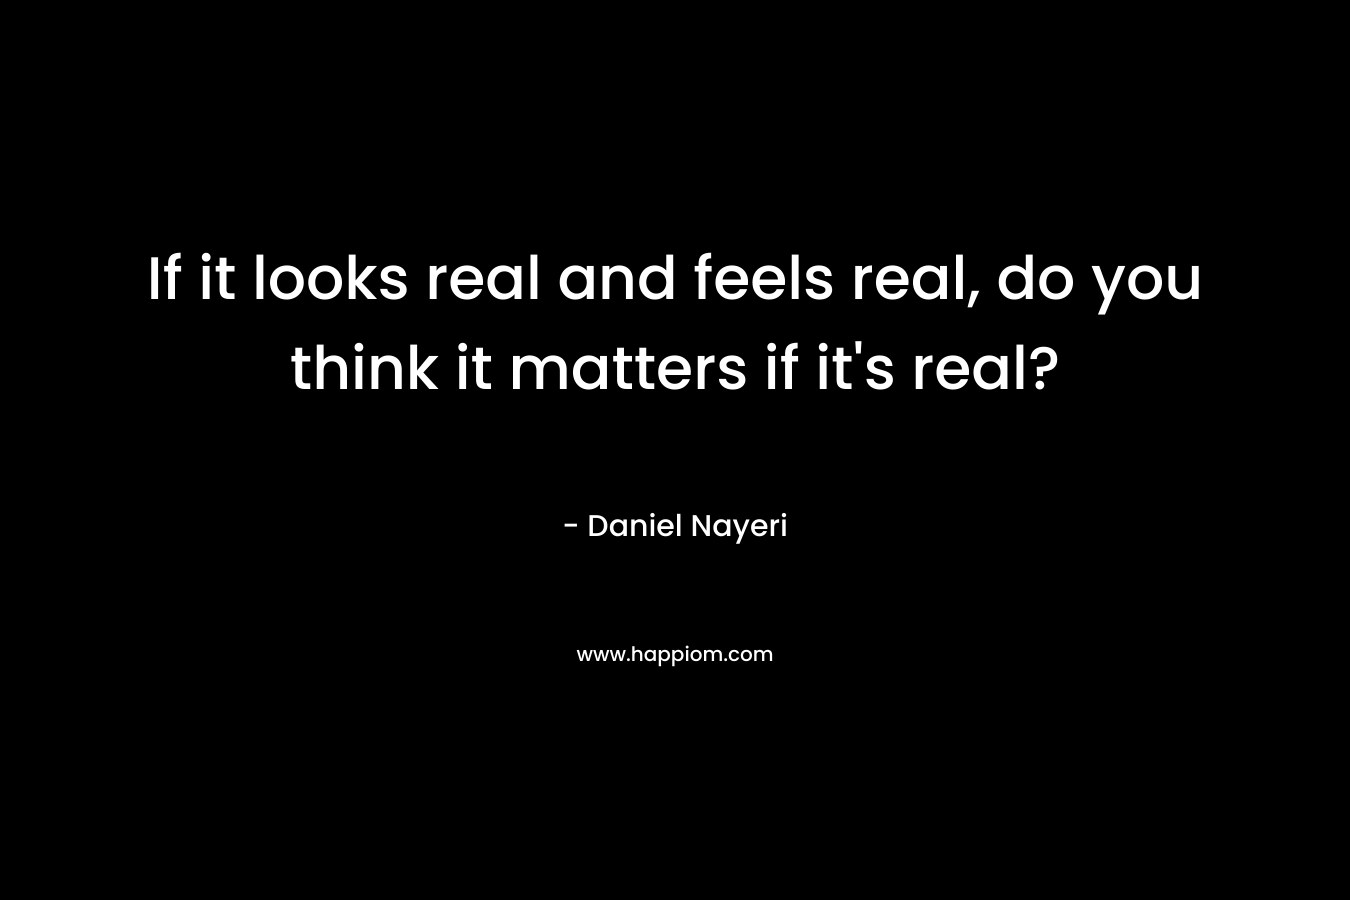 If it looks real and feels real, do you think it matters if it’s real? – Daniel Nayeri